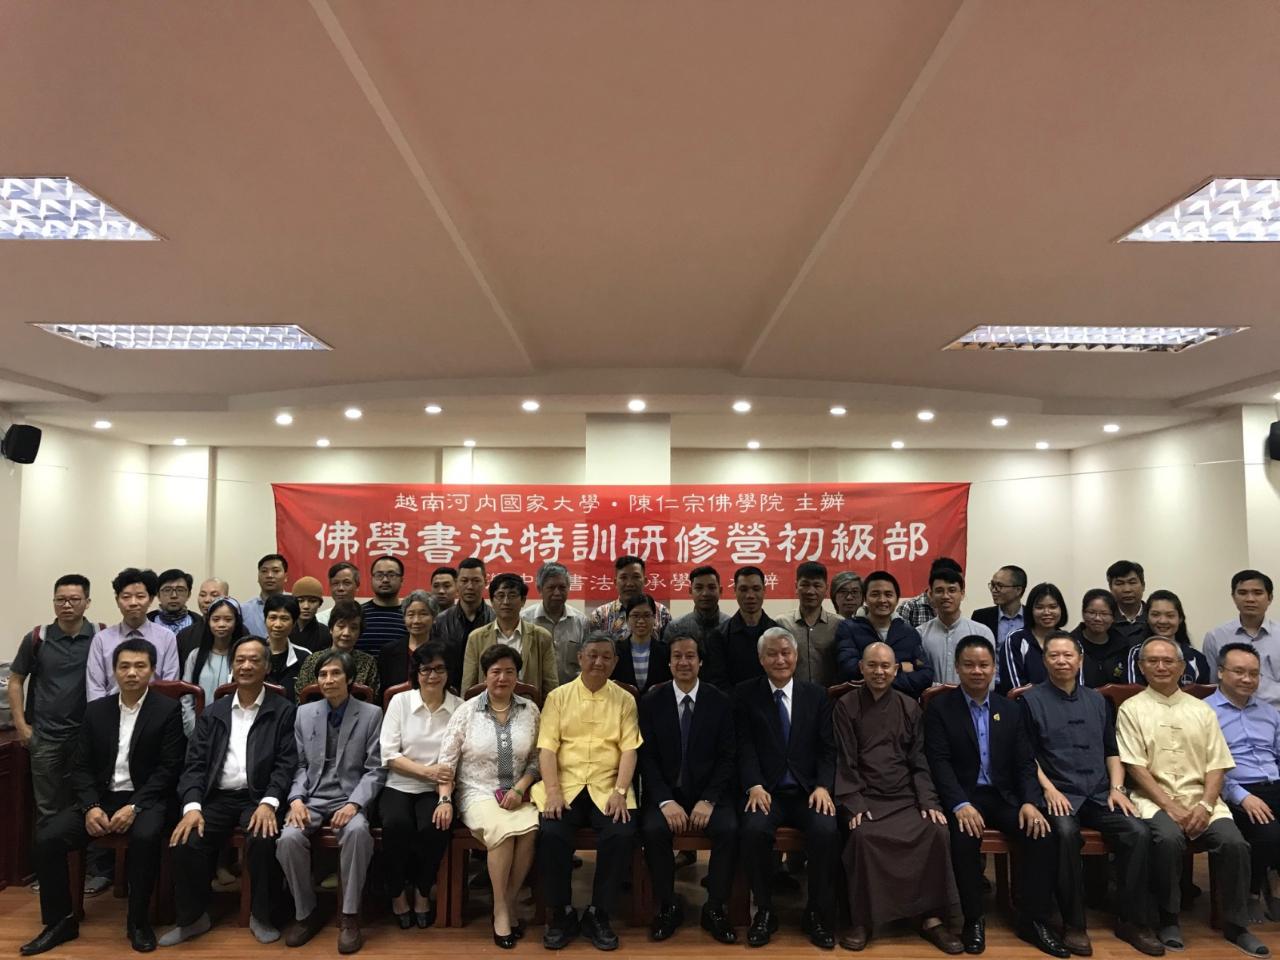 1.	Ambassador Shih (front right 6), Dr. Nguyen Kim Son, President of VNU (front right 7) and Mr. Pan Chin-Chung, Taiwanese calligraphy master (front left 6). 